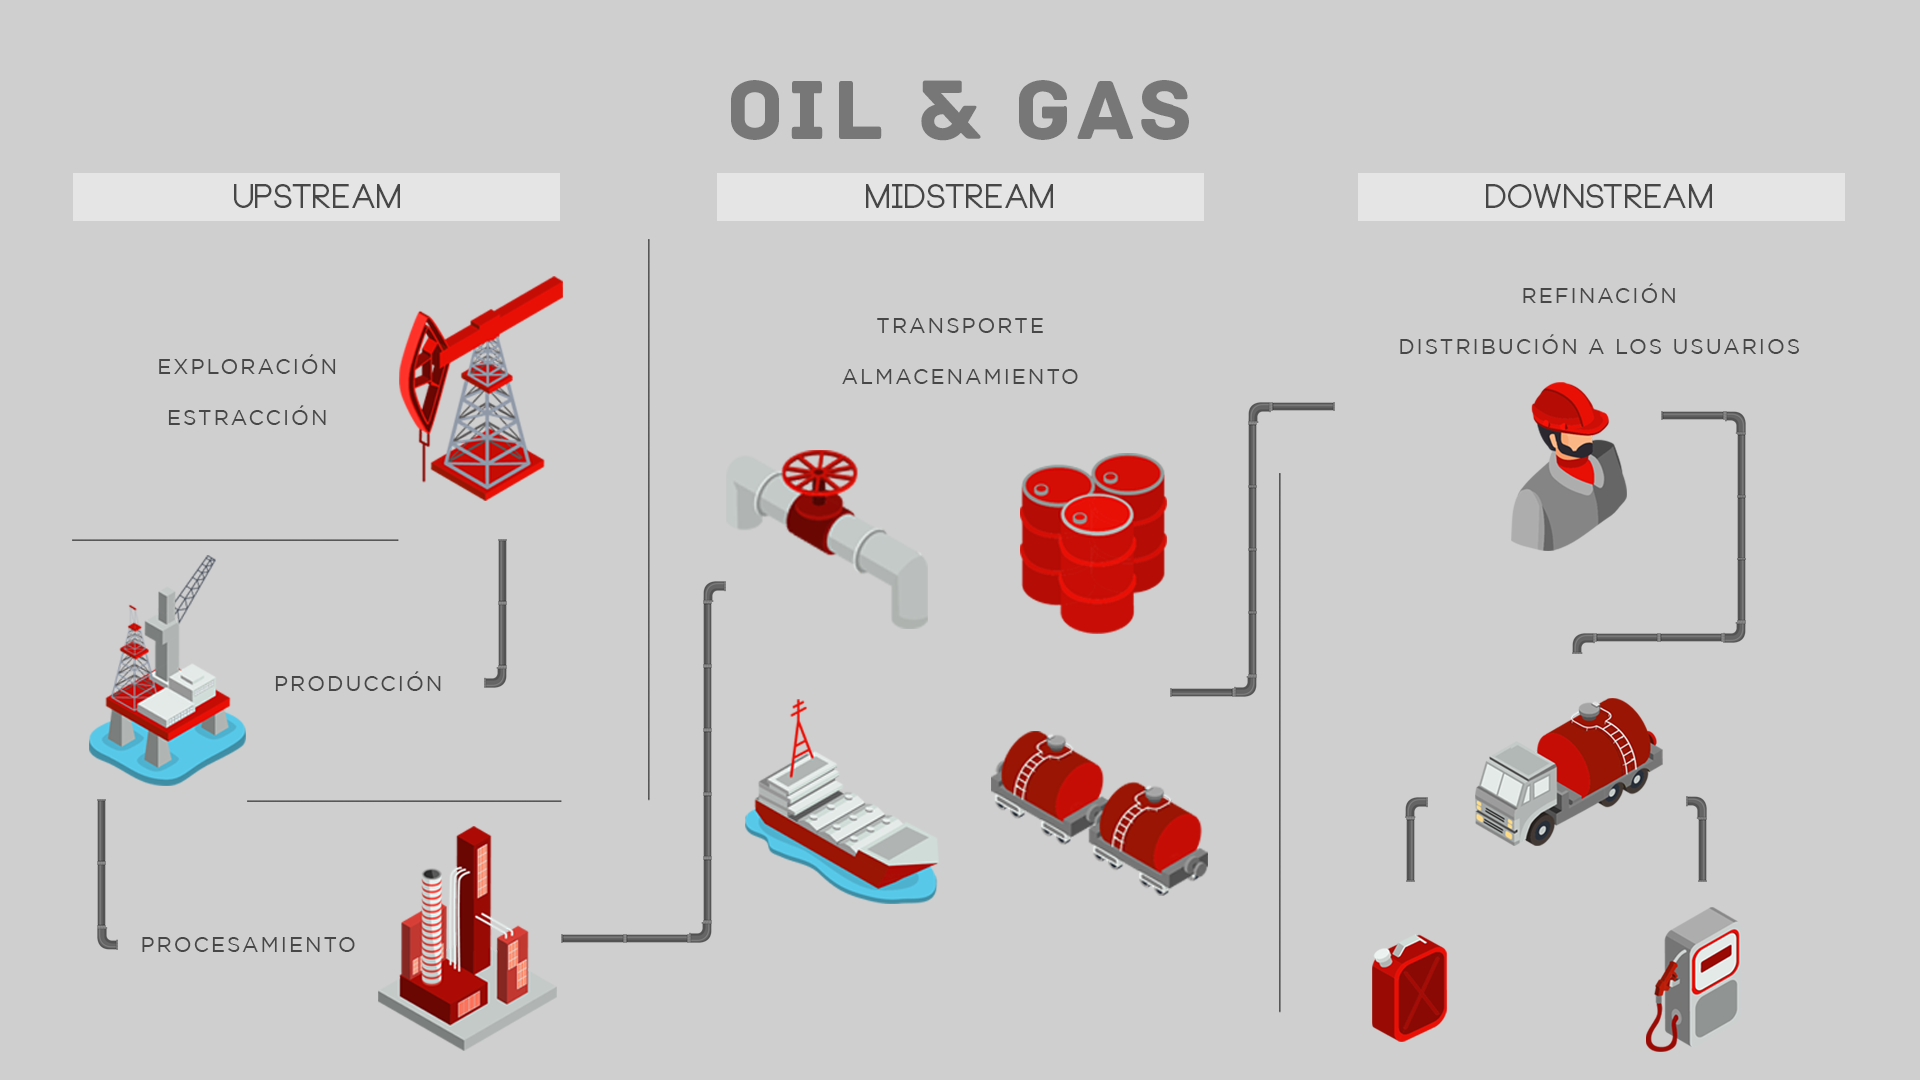 Oil And Gas Industry Upstream Midstream Downstream